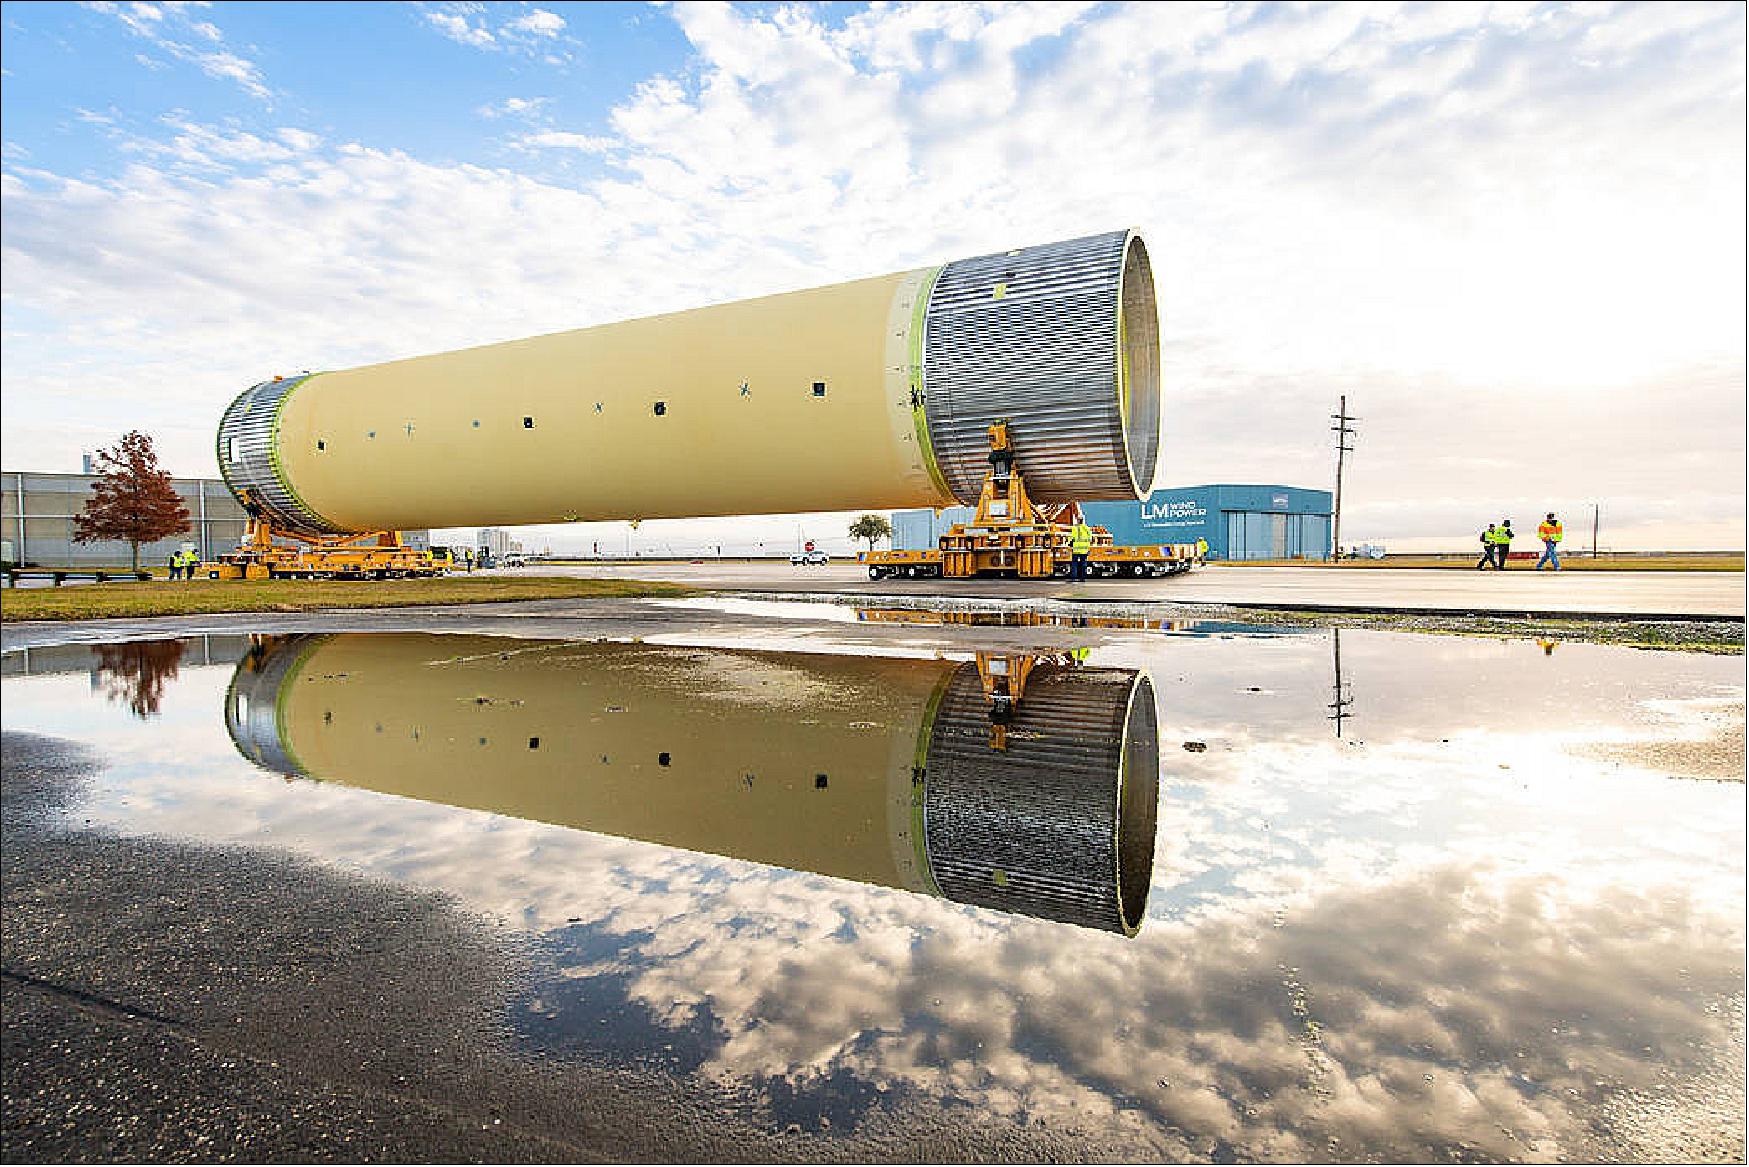 Figure 43: Photo of the SLS liquid hydrogen tank test article transport at the Michoud Assembly Facility (image credit: NASA/Steven Seipel)